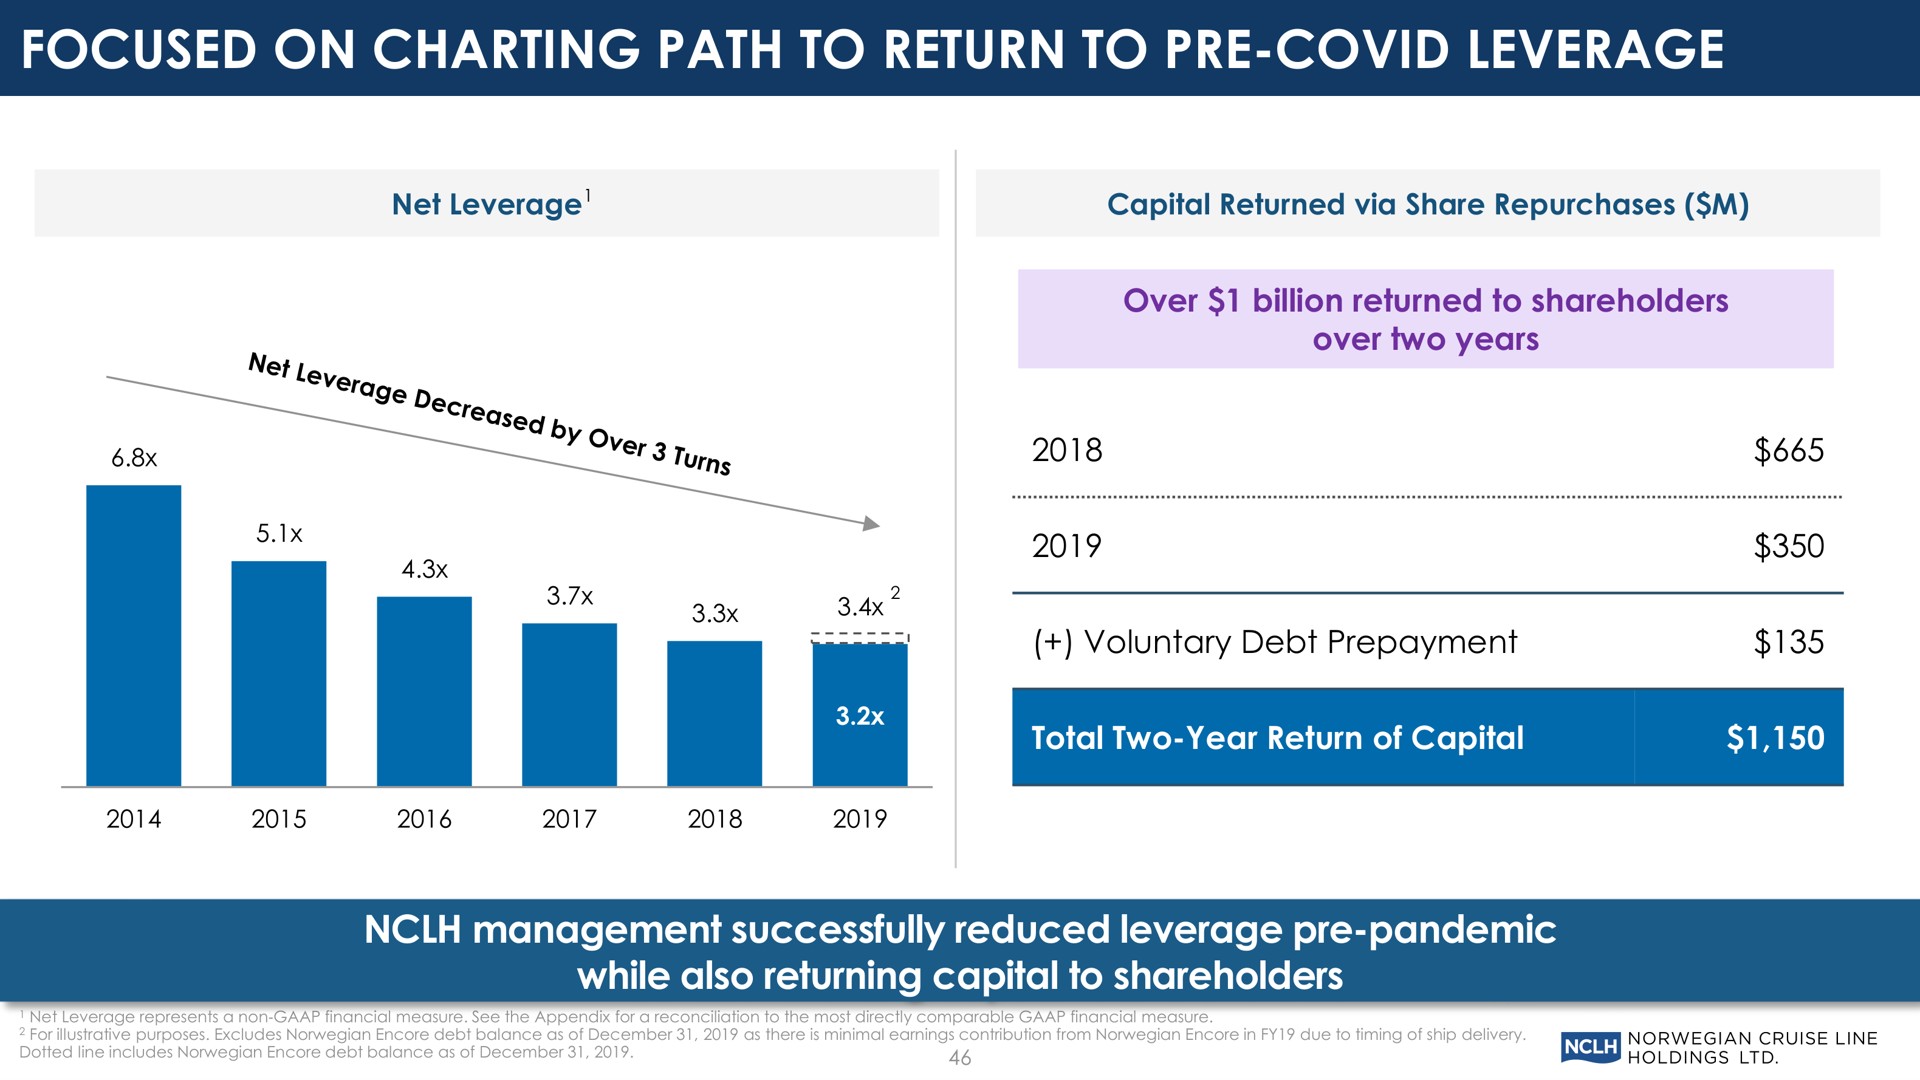 focused on charting path to return to covid leverage management successfully reduced leverage pandemic while also returning capital to shareholders | Norwegian Cruise Line